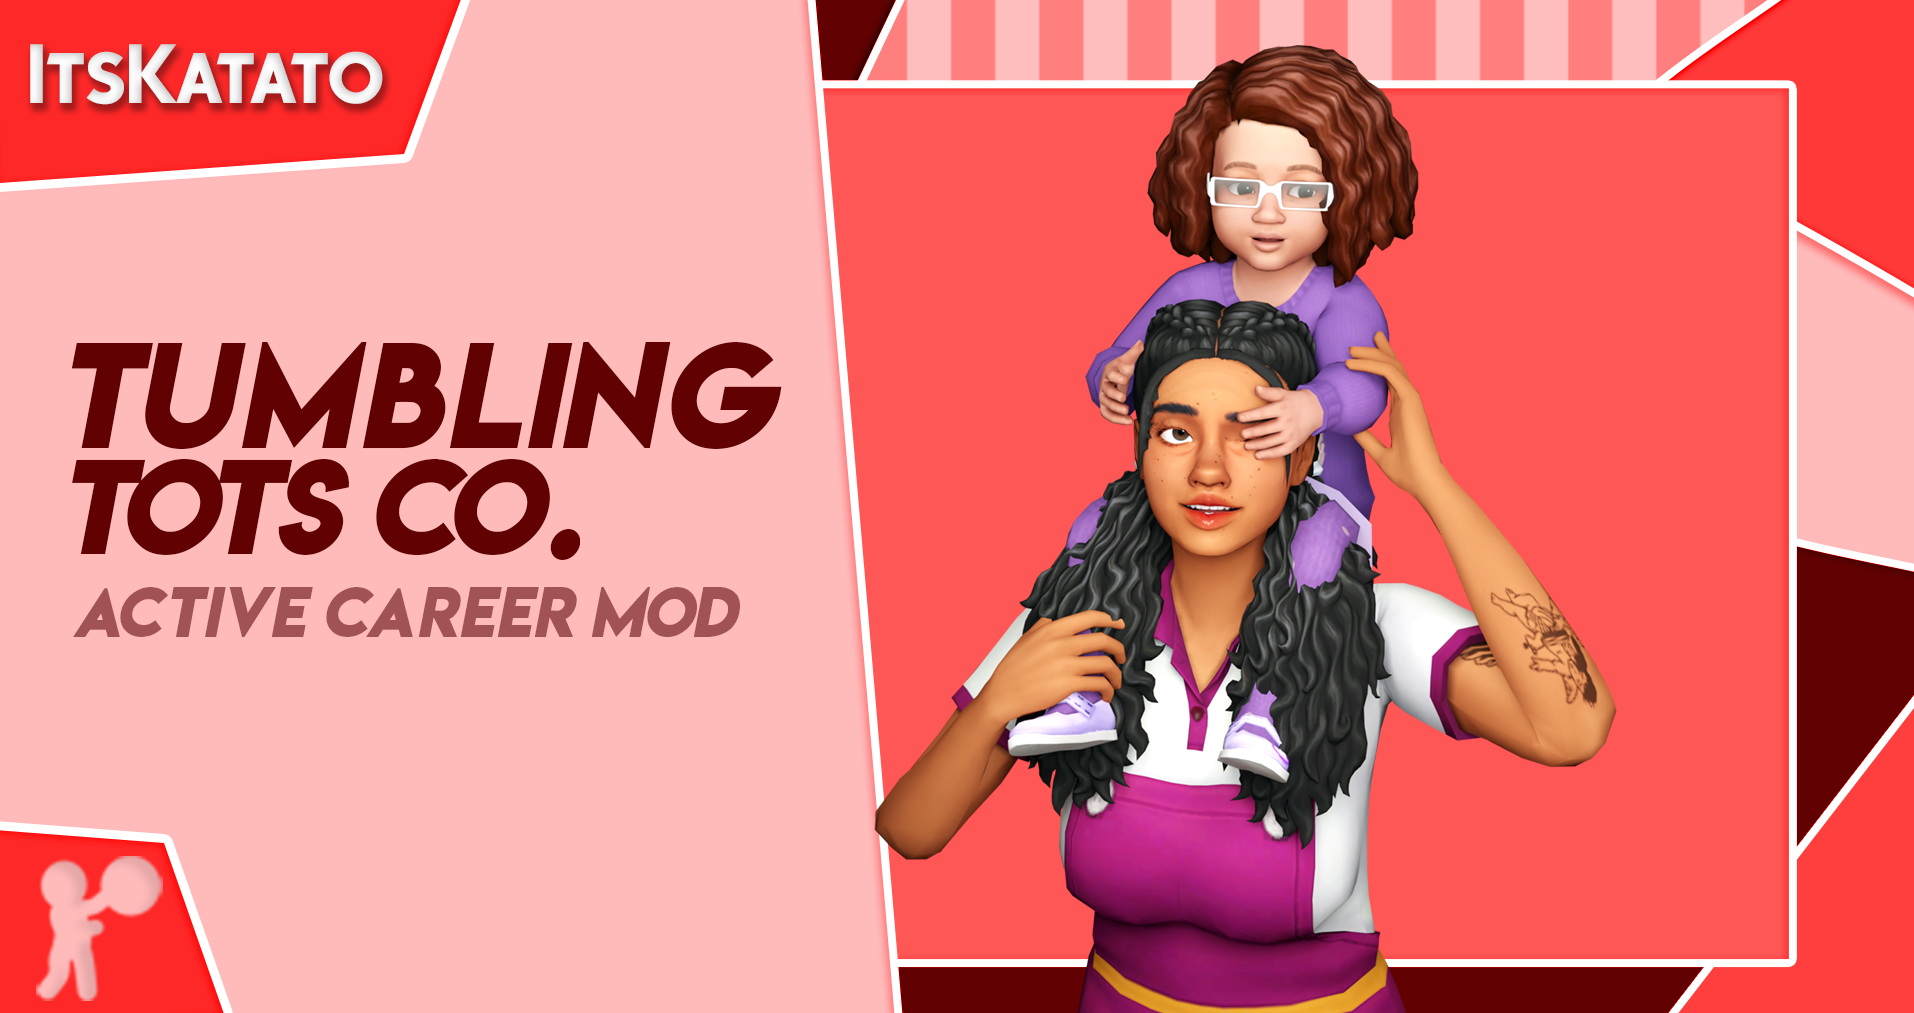 how to download mods the sims 4